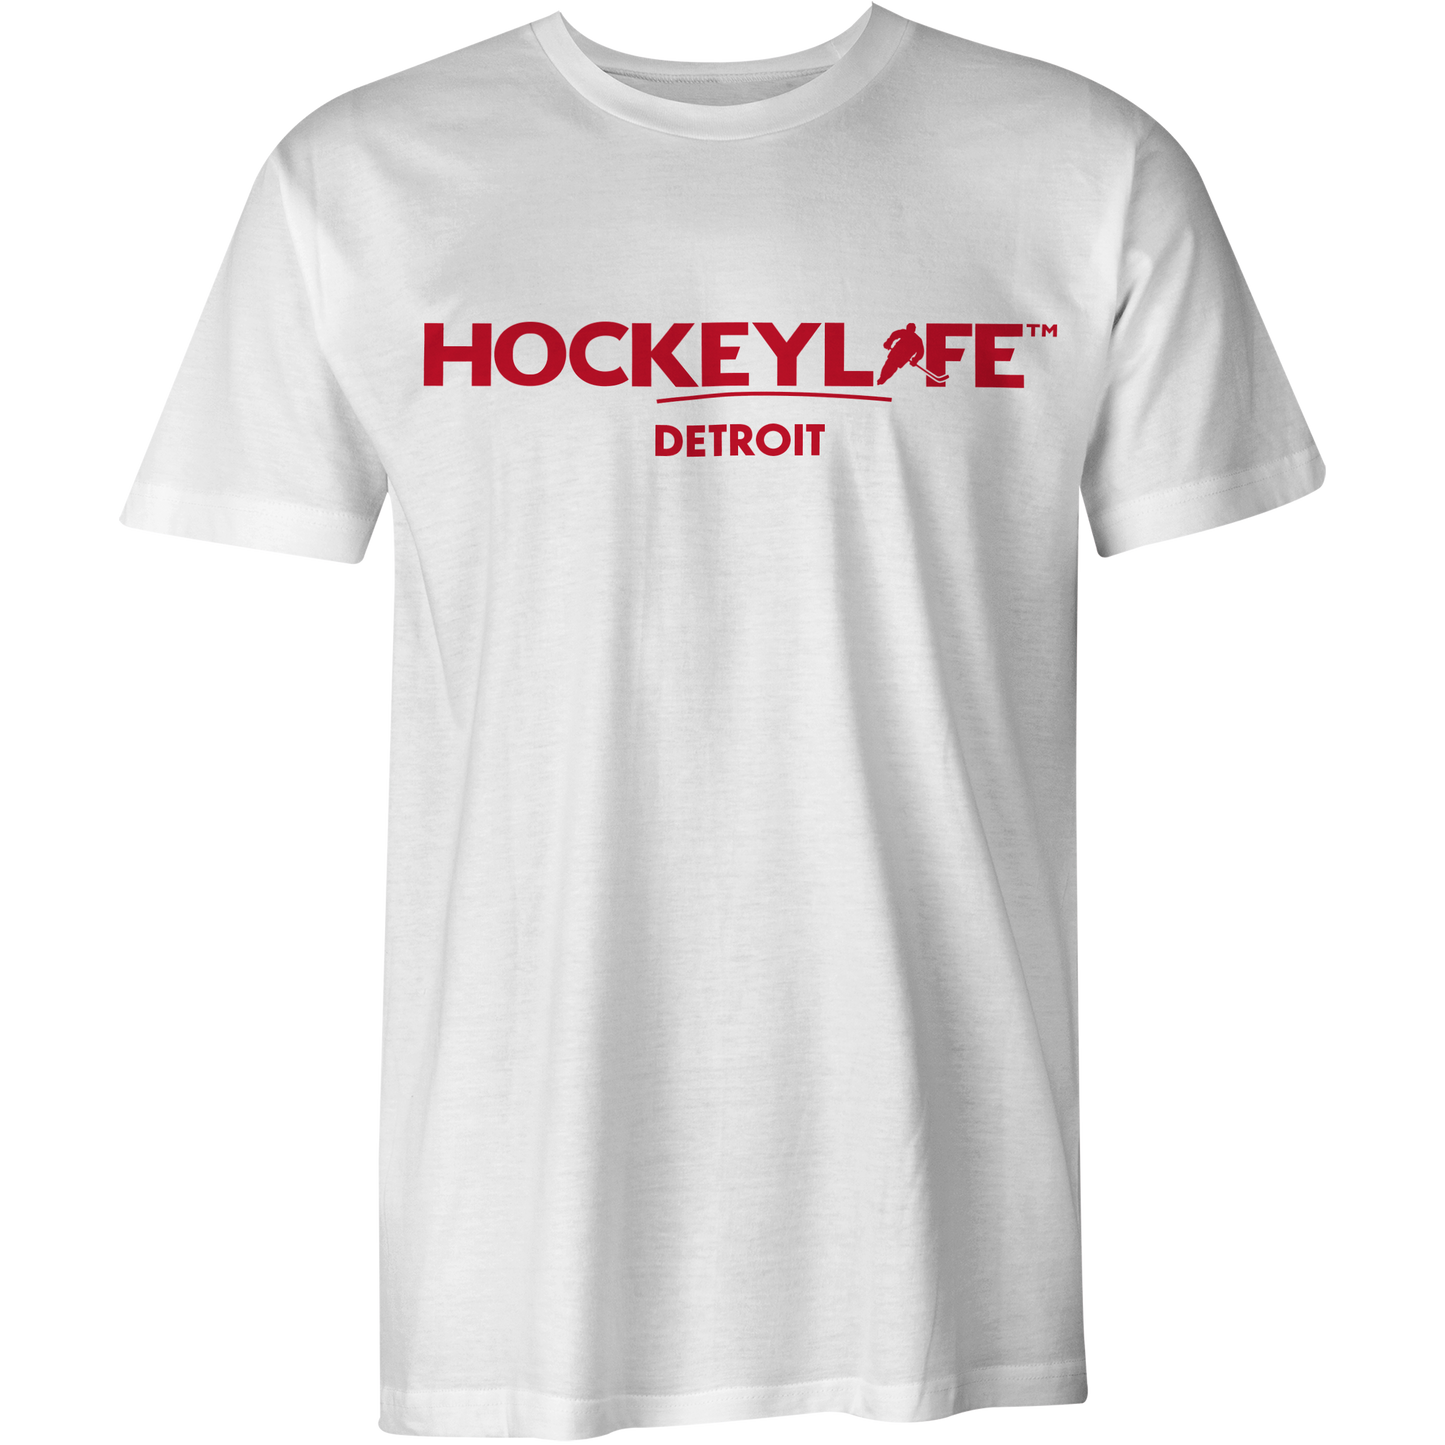 Detroit Red Wings T-Shirts, Red Wings Tees, Hockey T-Shirts